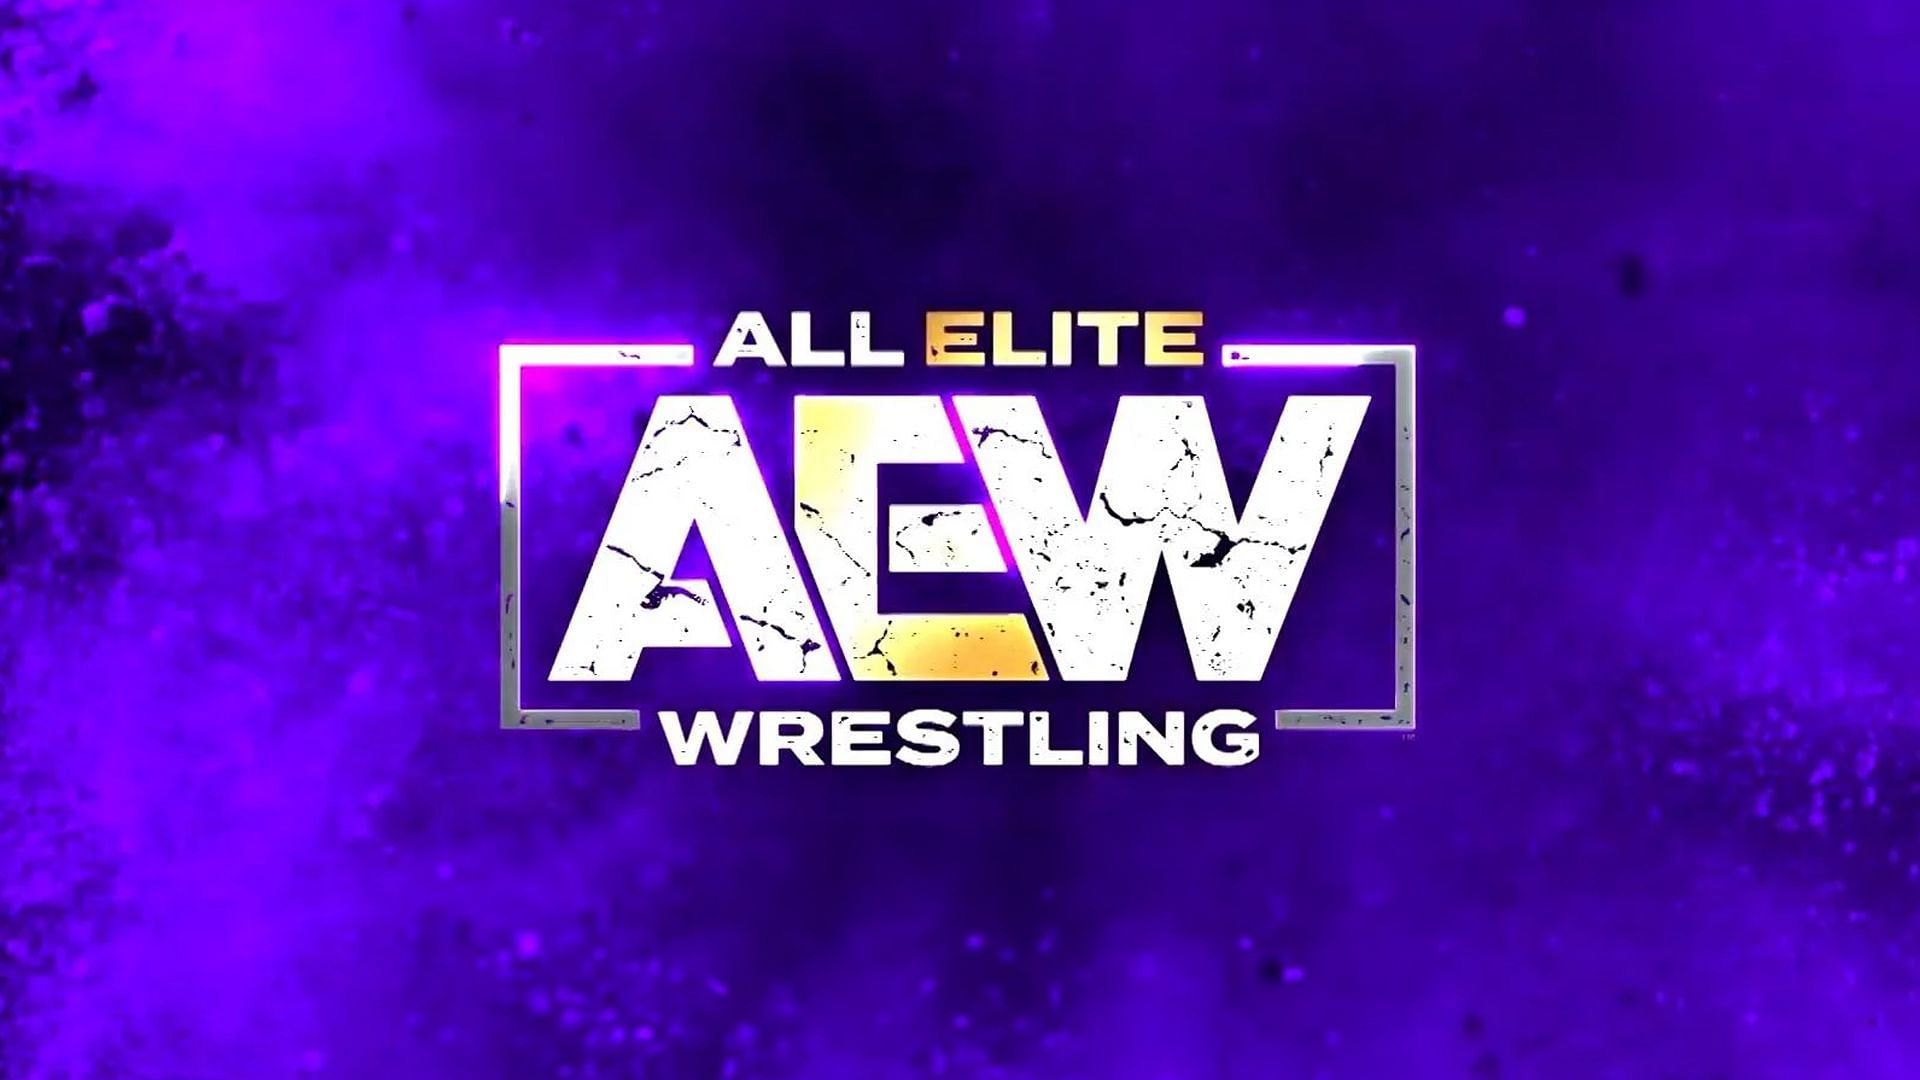 AEW is in the midst of building several young stars